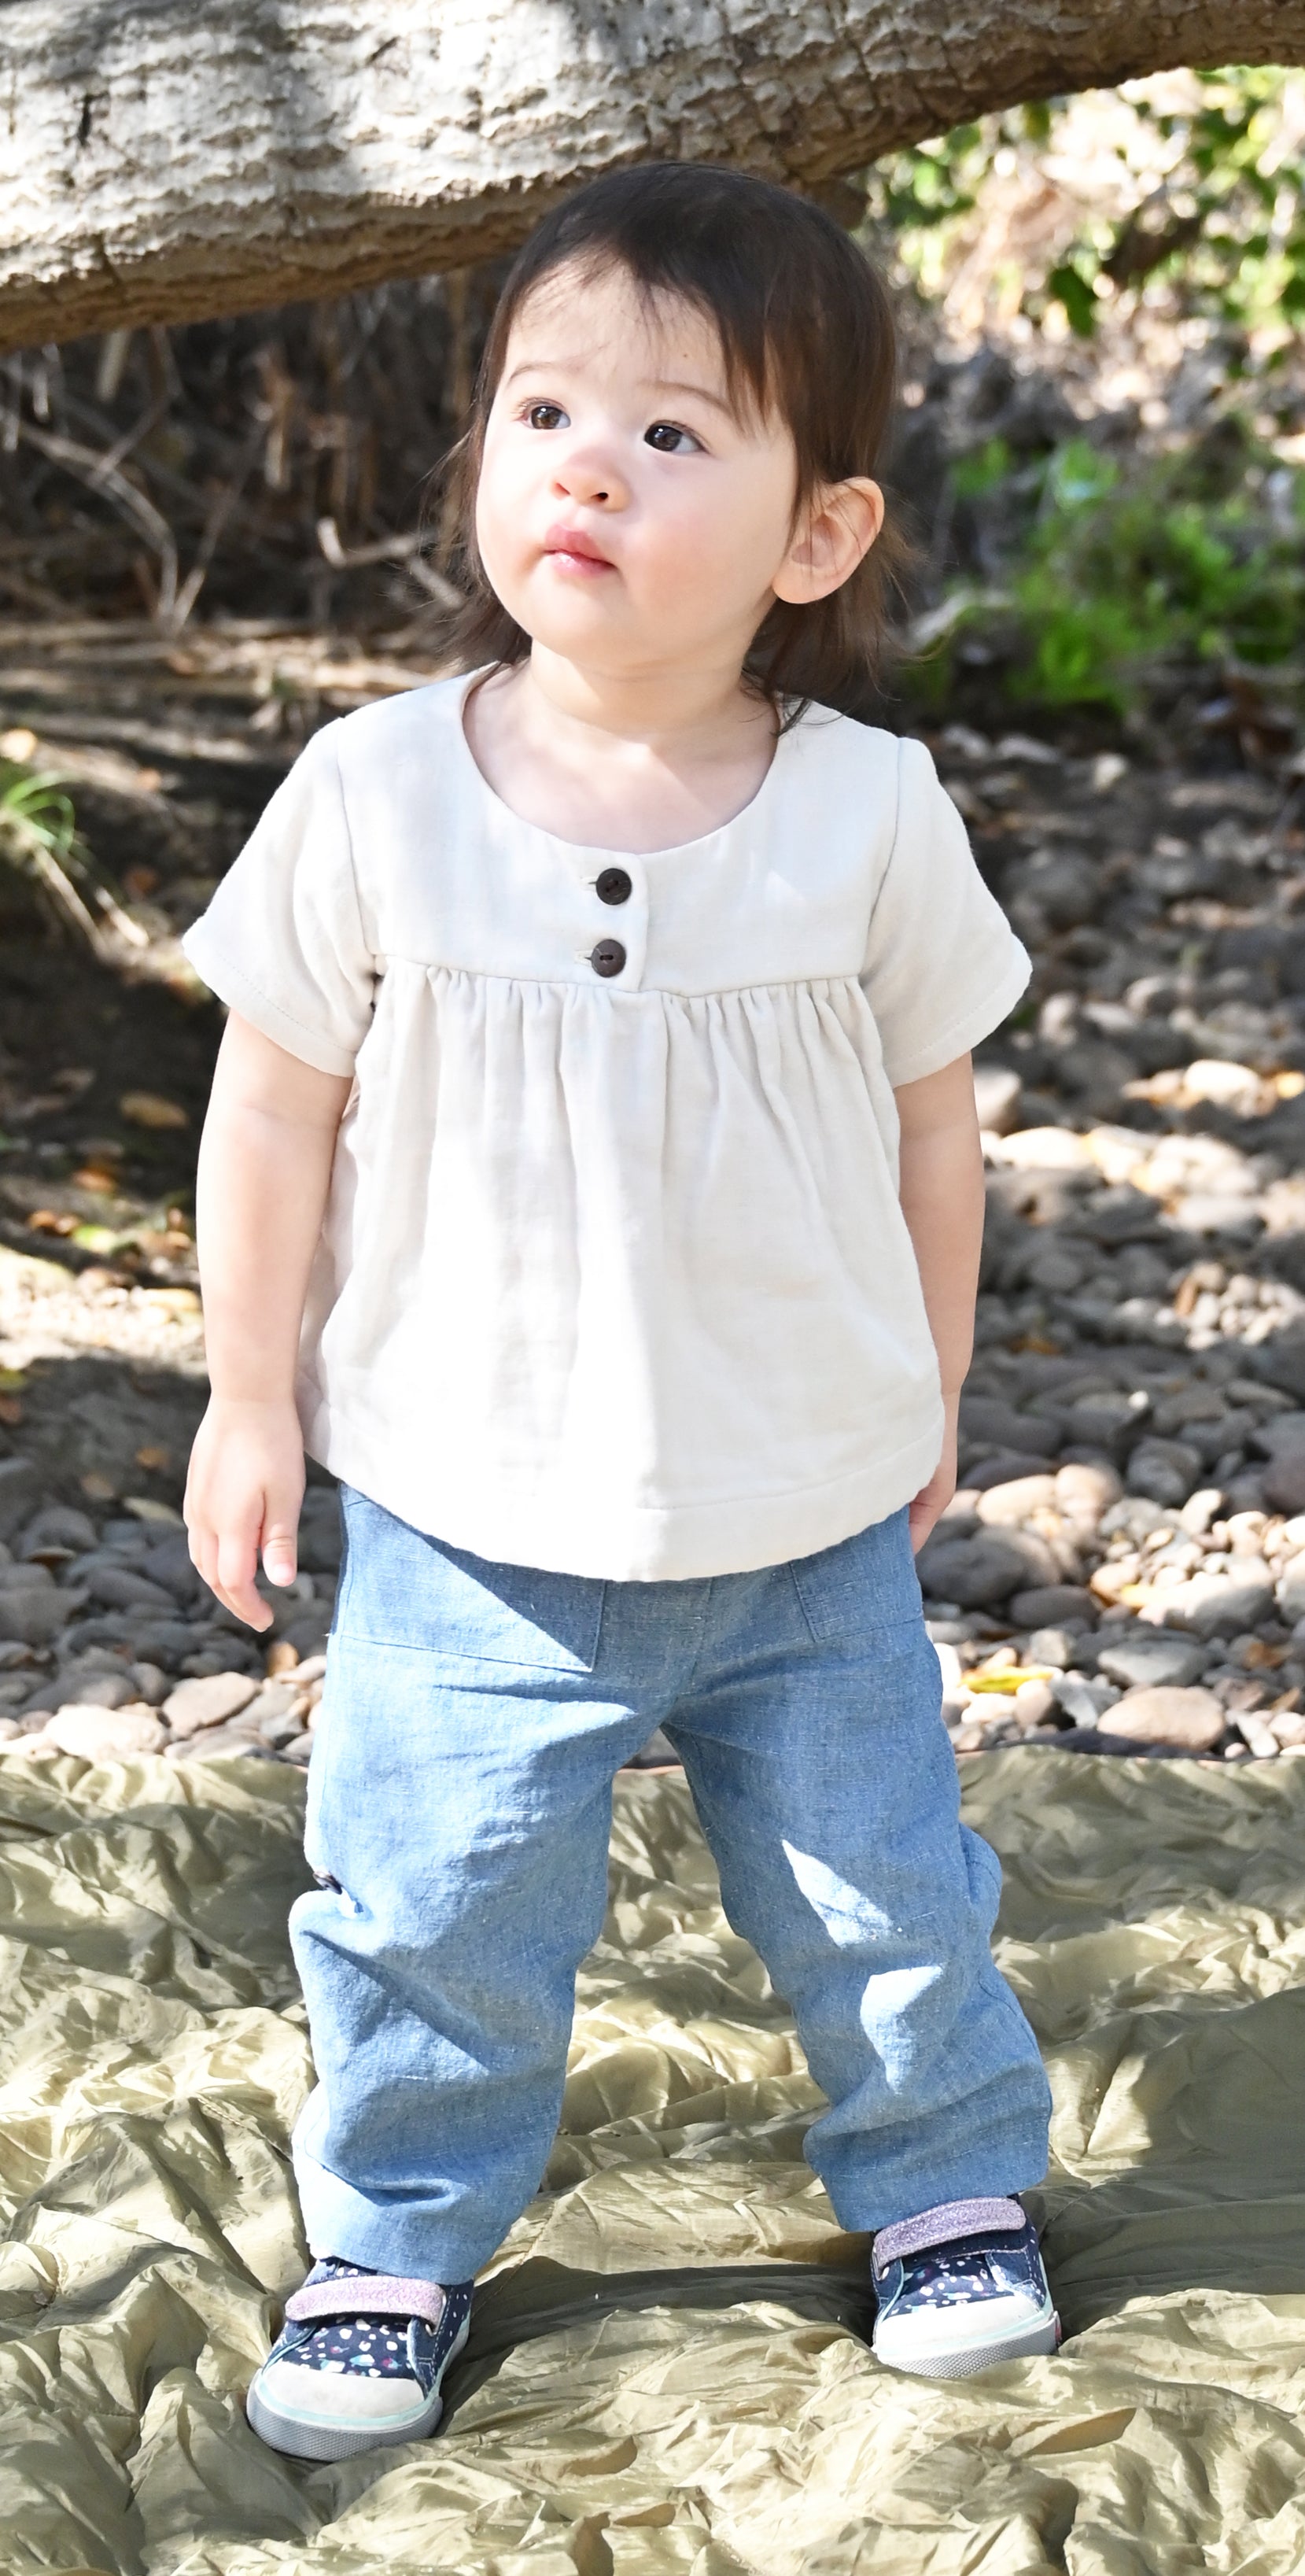 Our model is wearing size 18-24m and is 20 months, 23 lbs and 33" tall.